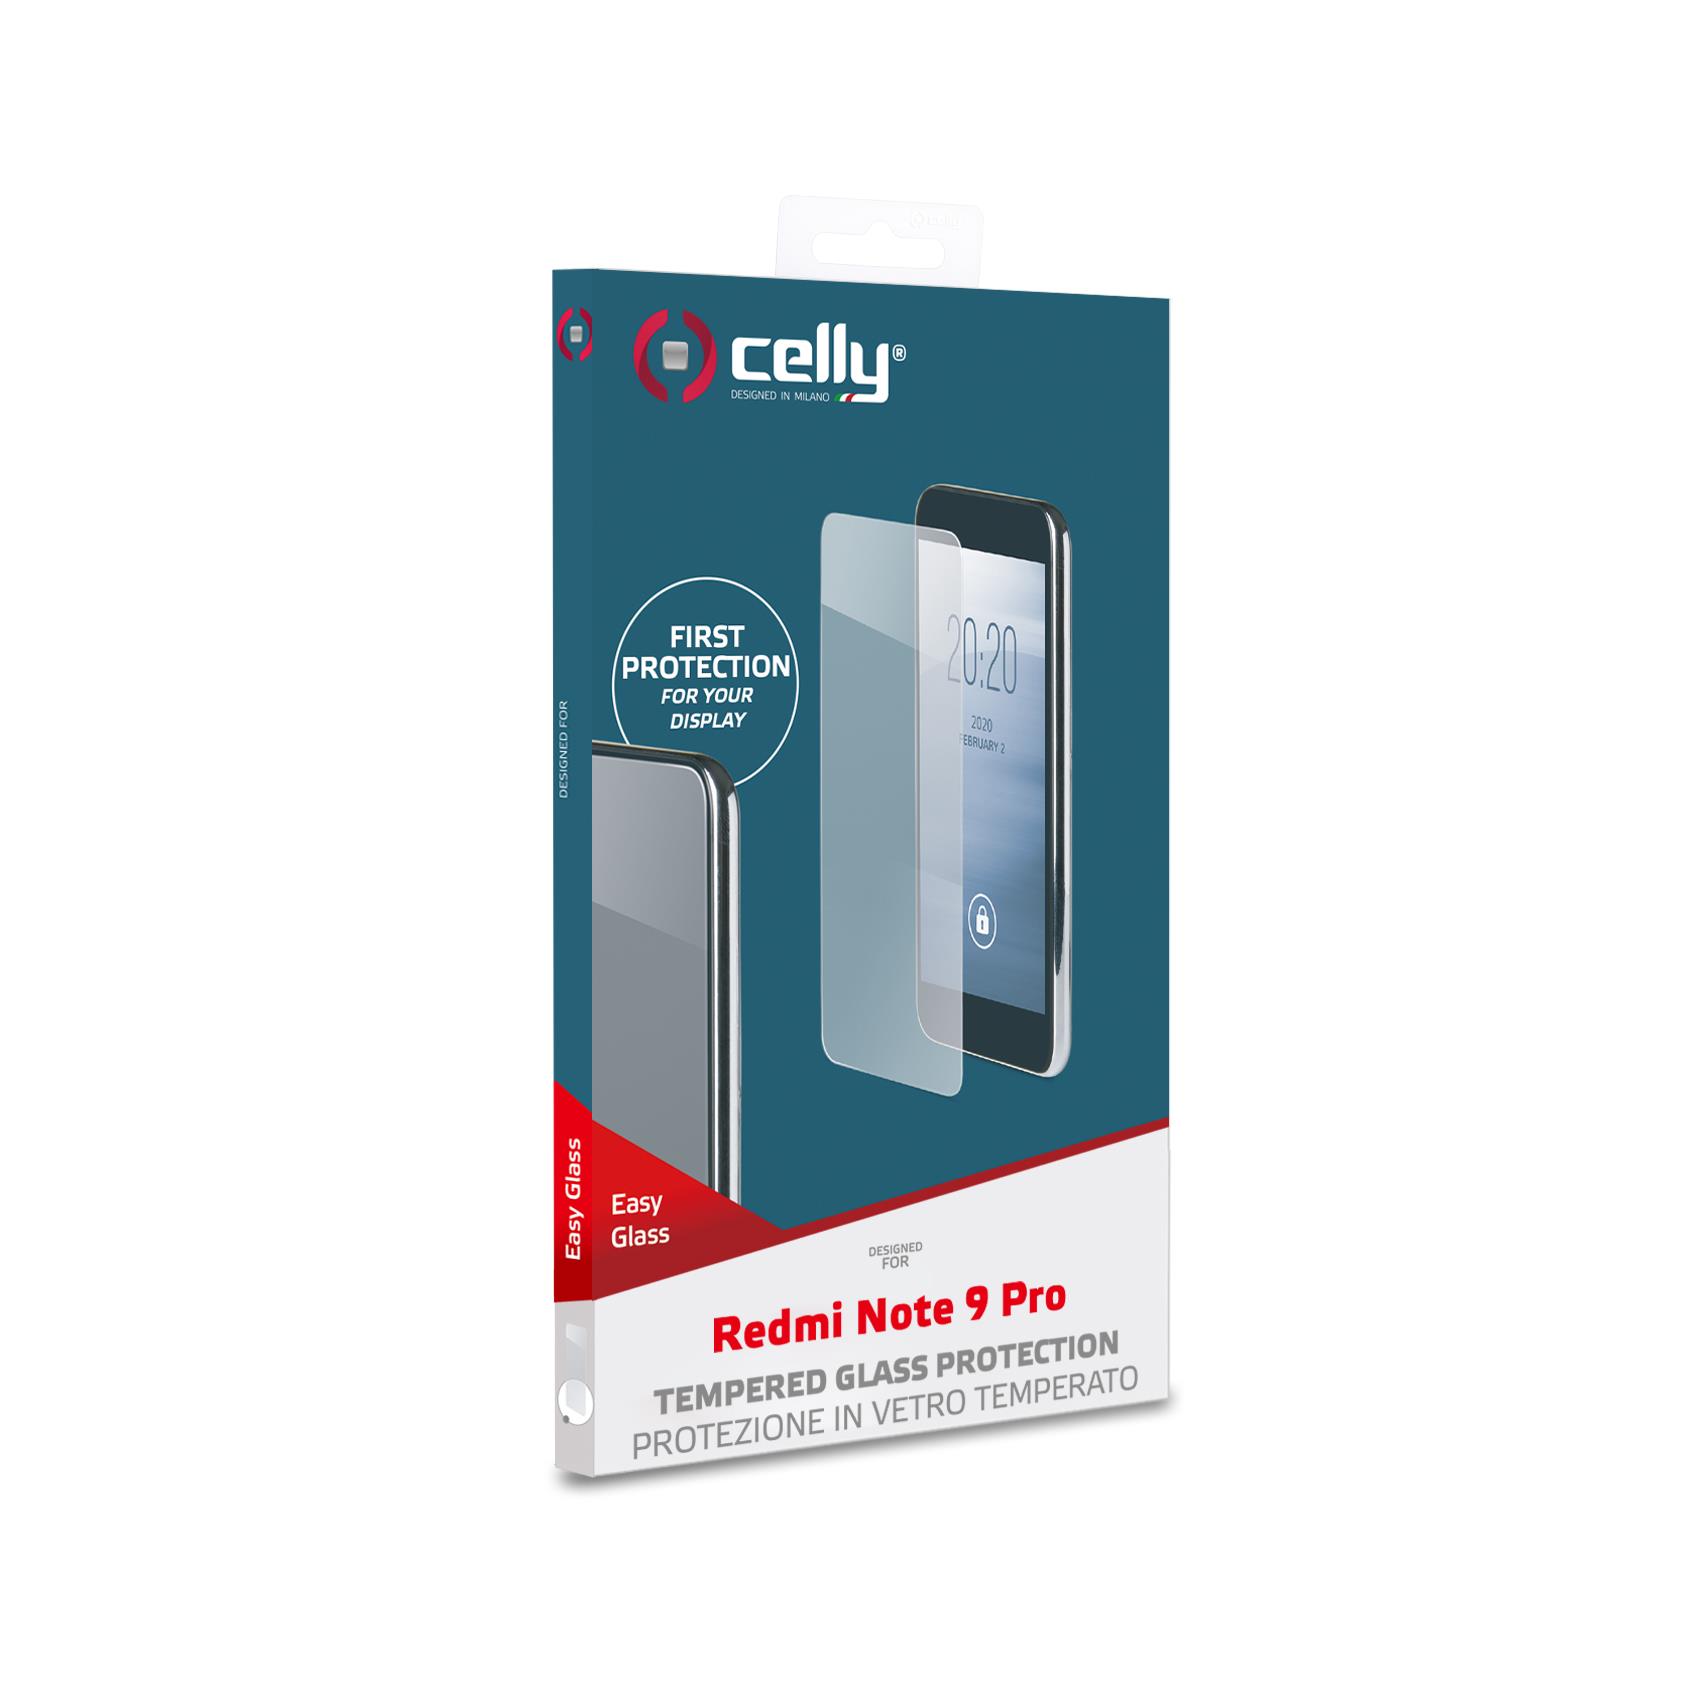 Easy Glass Redmi Note 9 Pro Celly Easy921 8021735760443